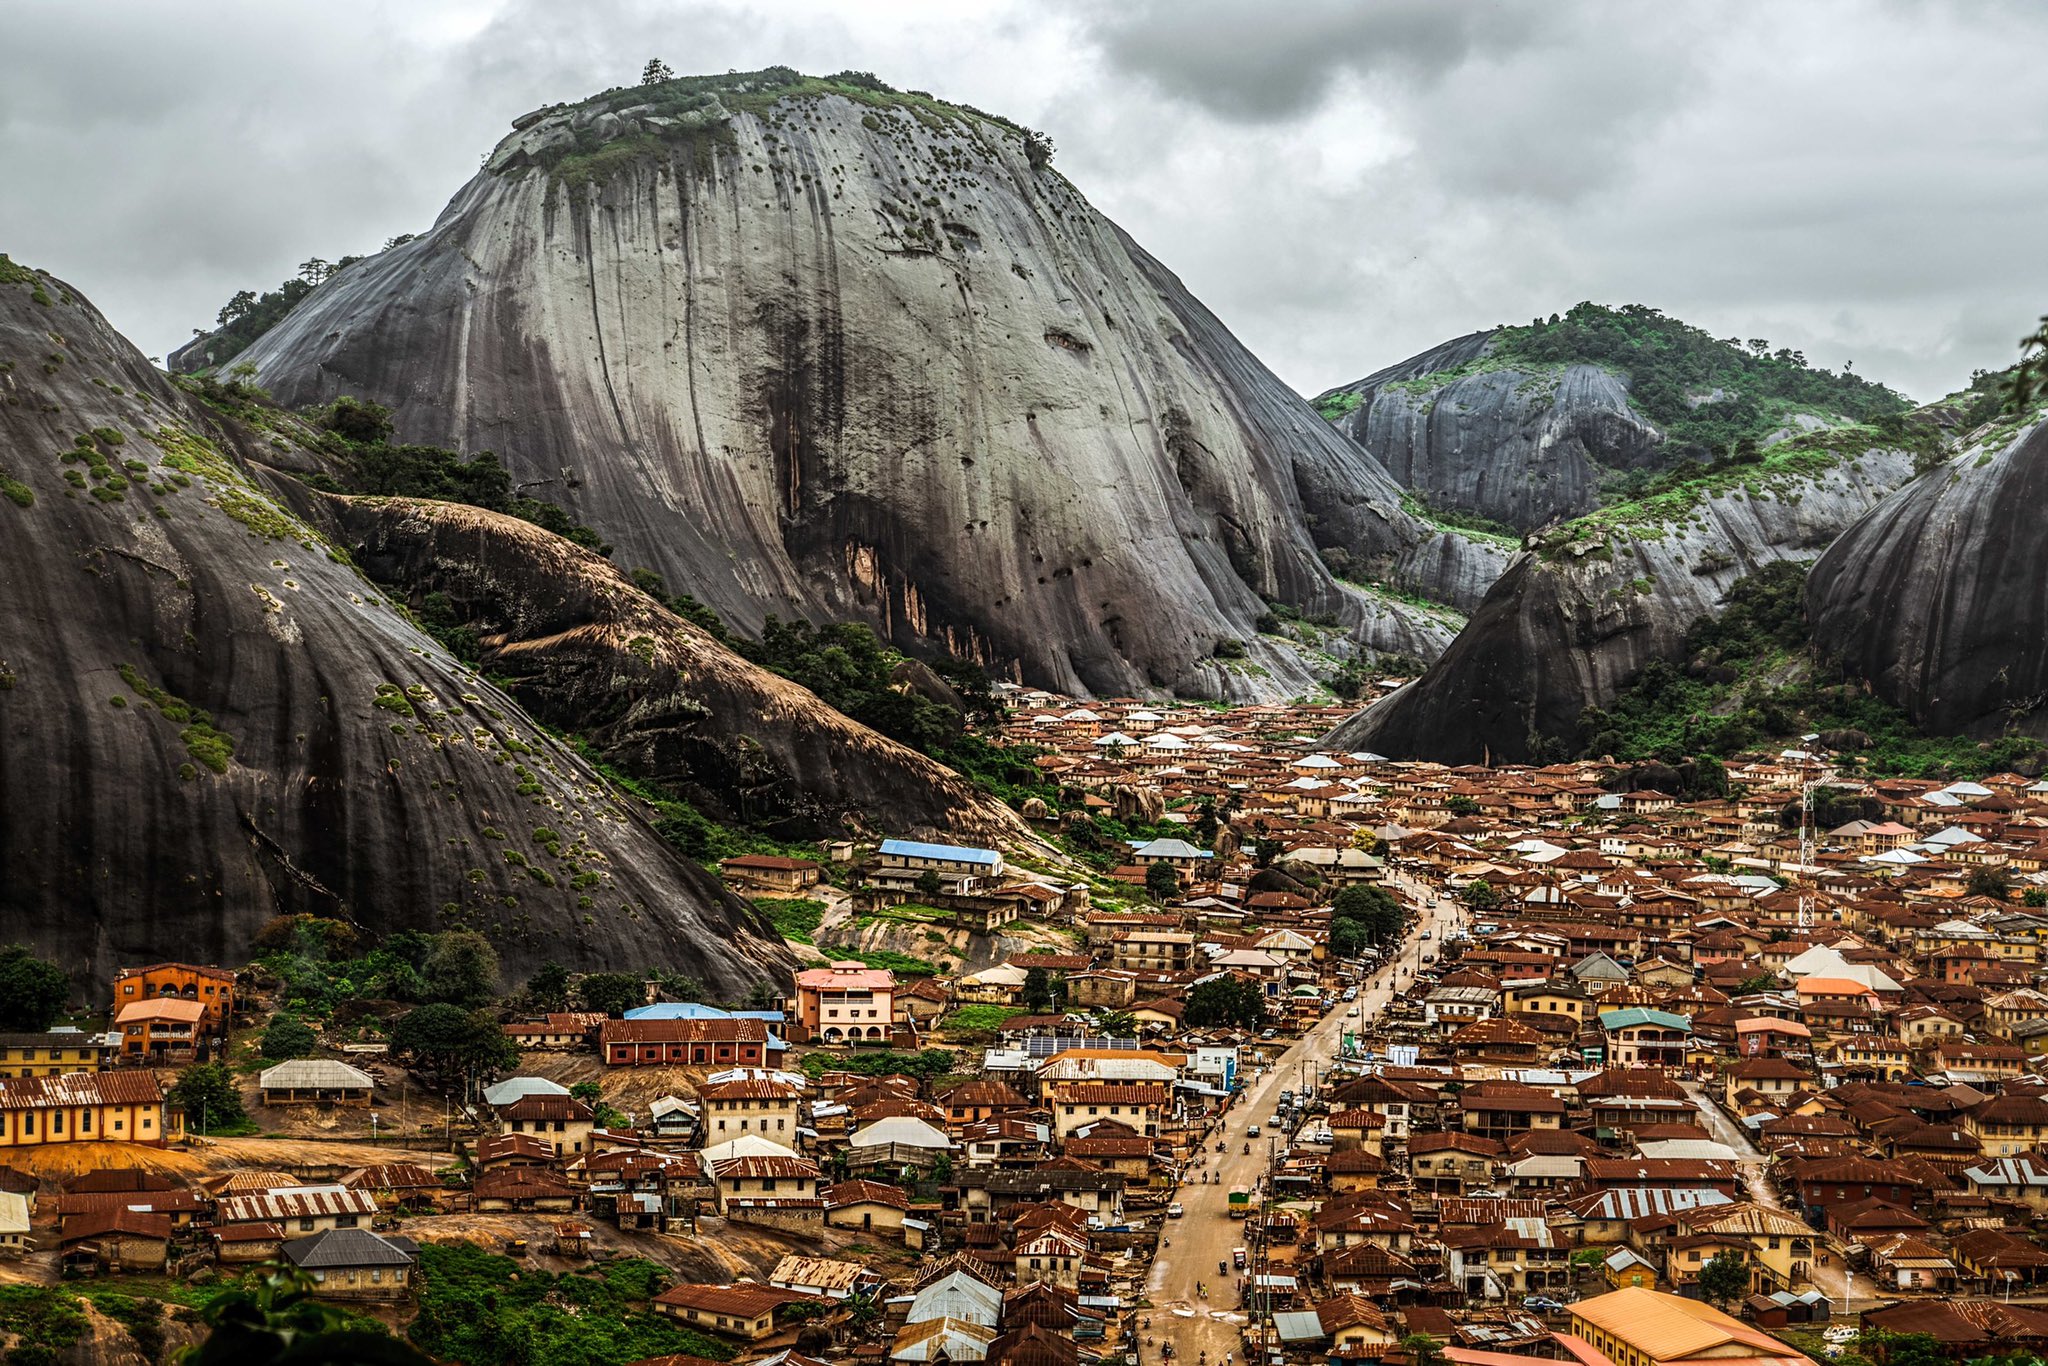 Idanre hill one of the Amazing Places to Visit in Nigeria